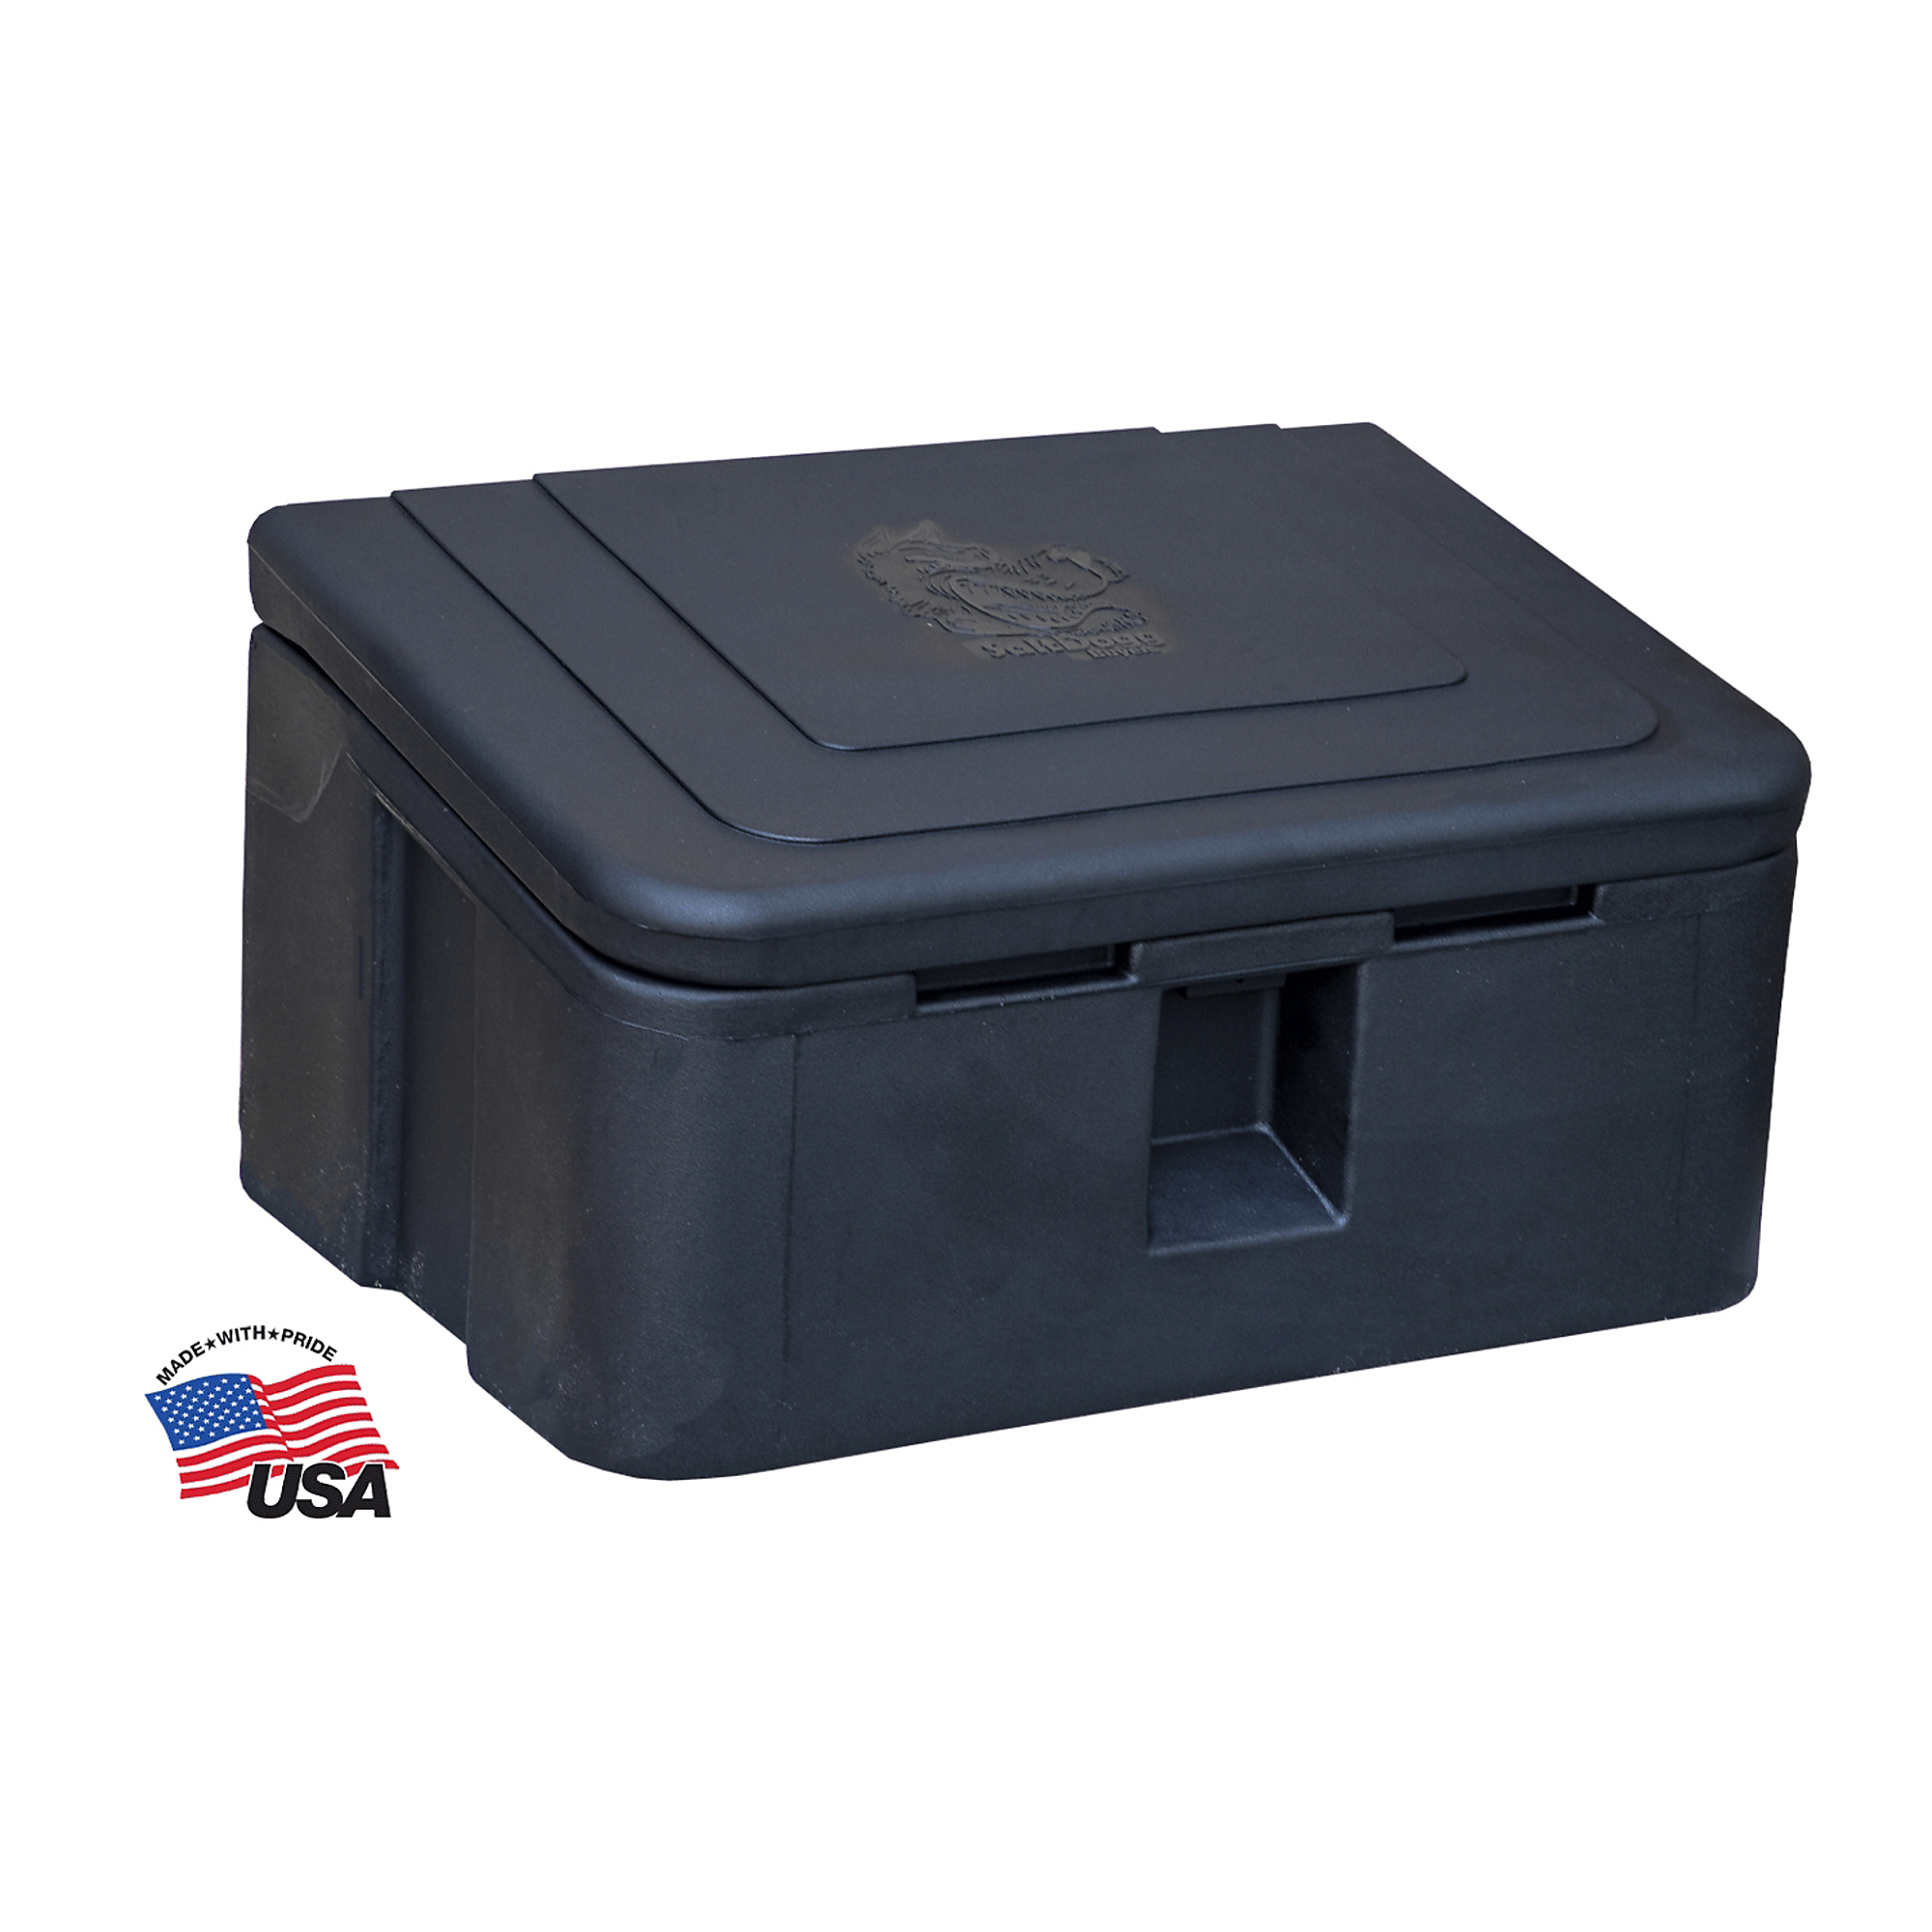 Storage Containers, All-Weather Salt Boxes